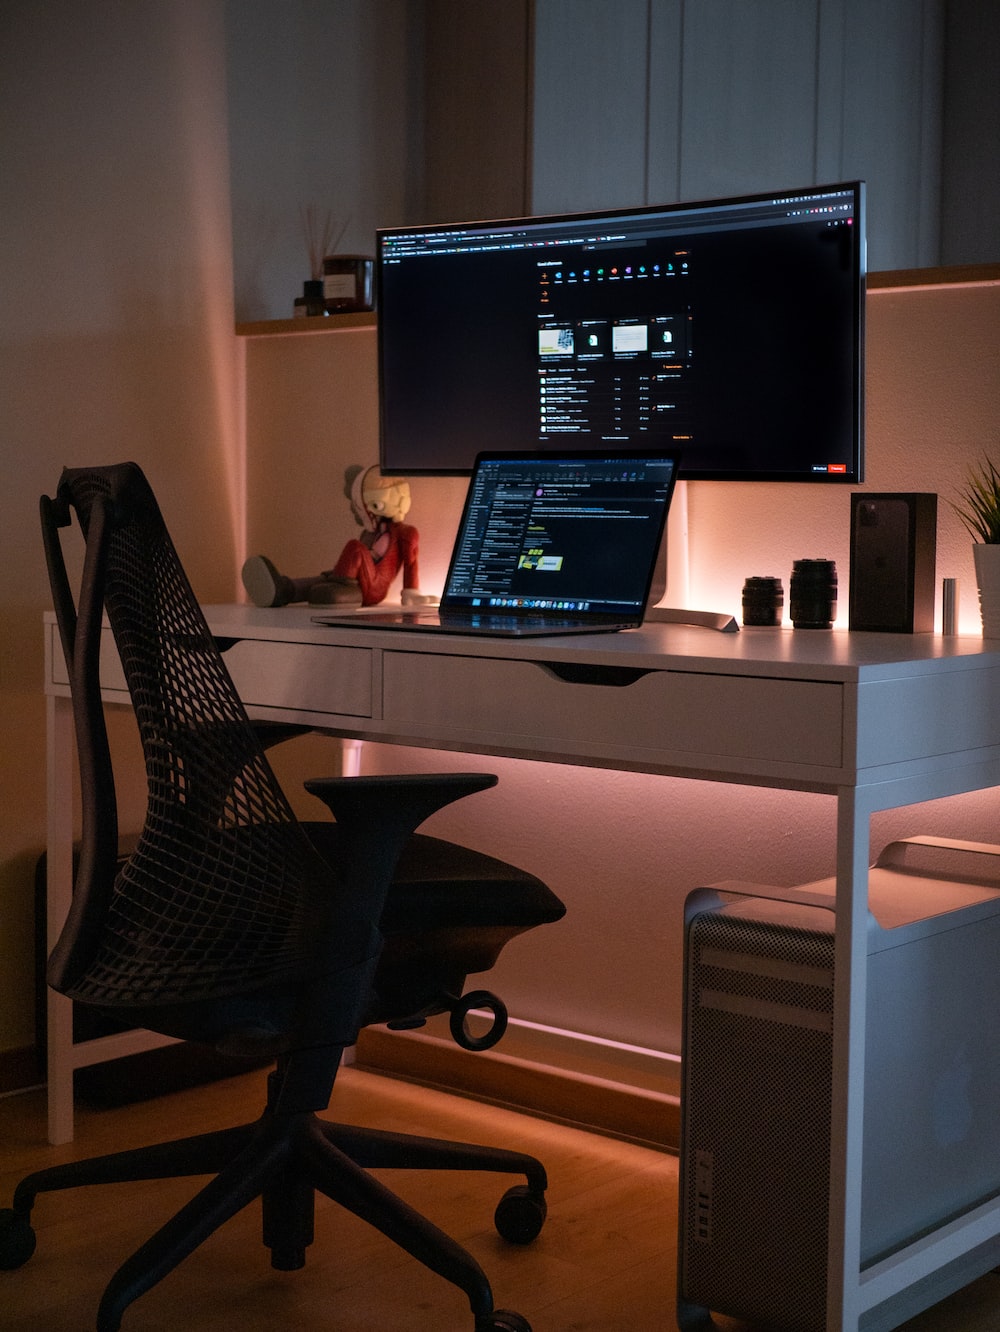 How do you set up a desk in a small space?